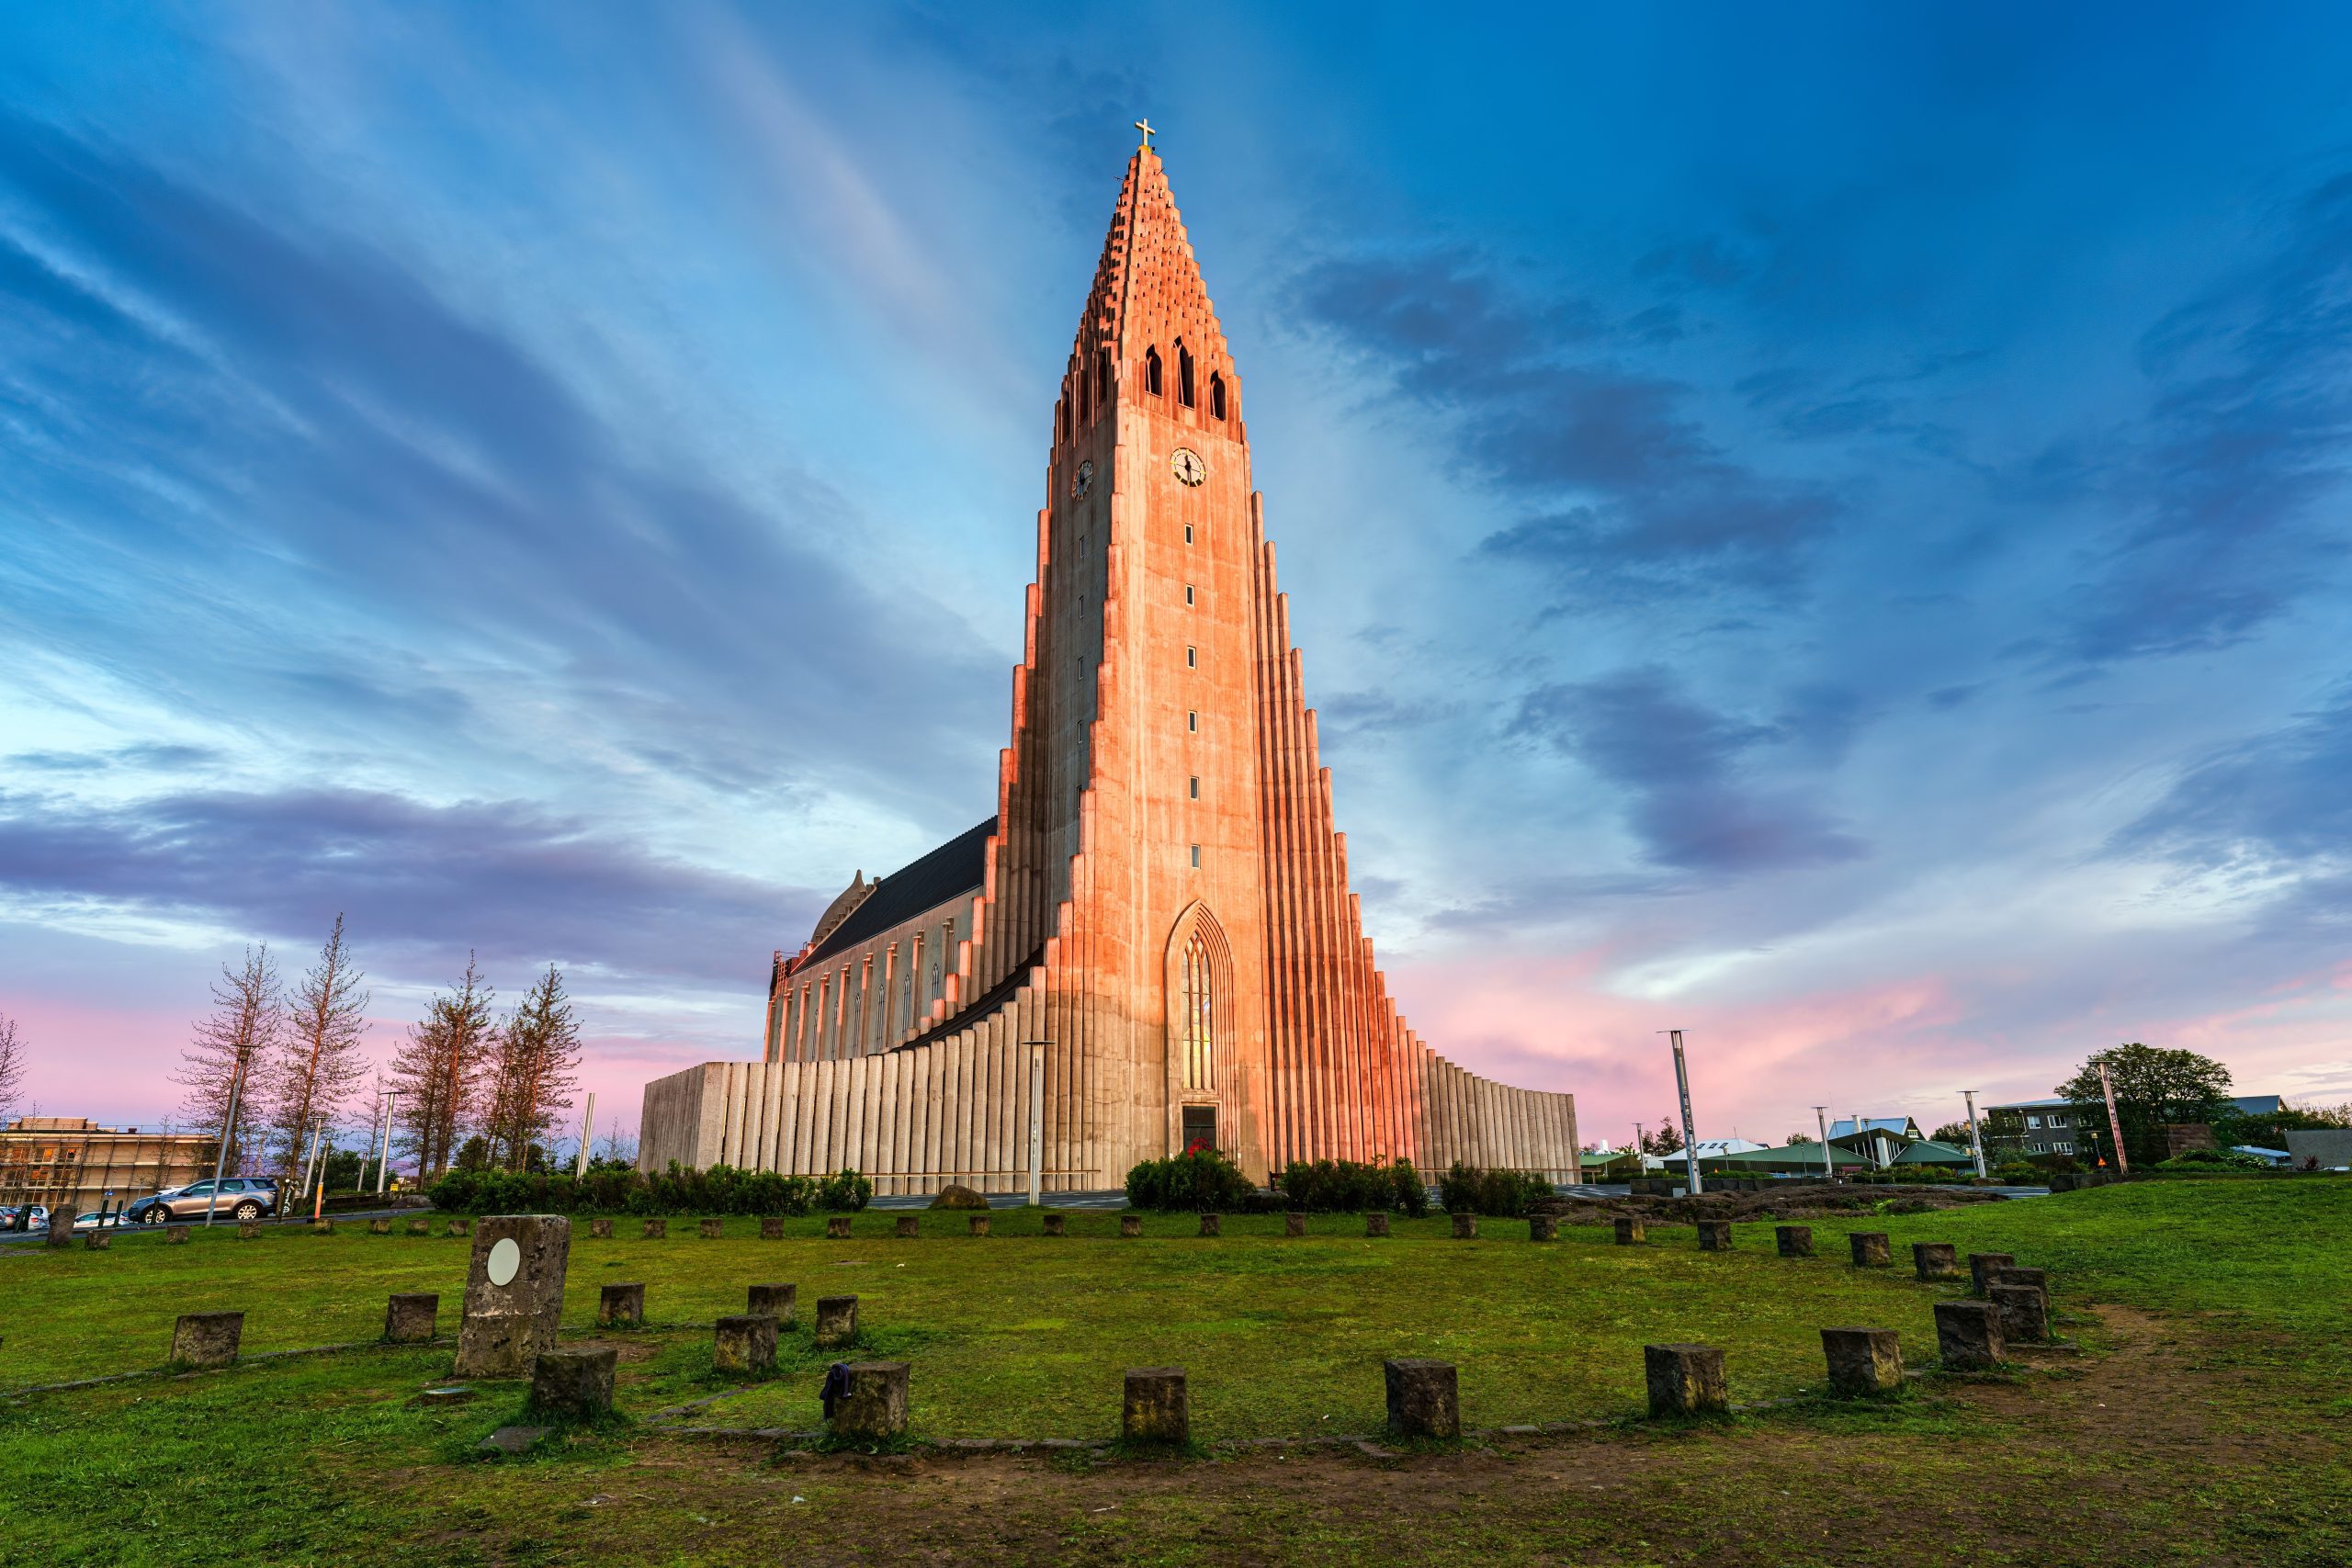 Plan A Day Trip to Reykjavik – The Scenic Icelandic Capital